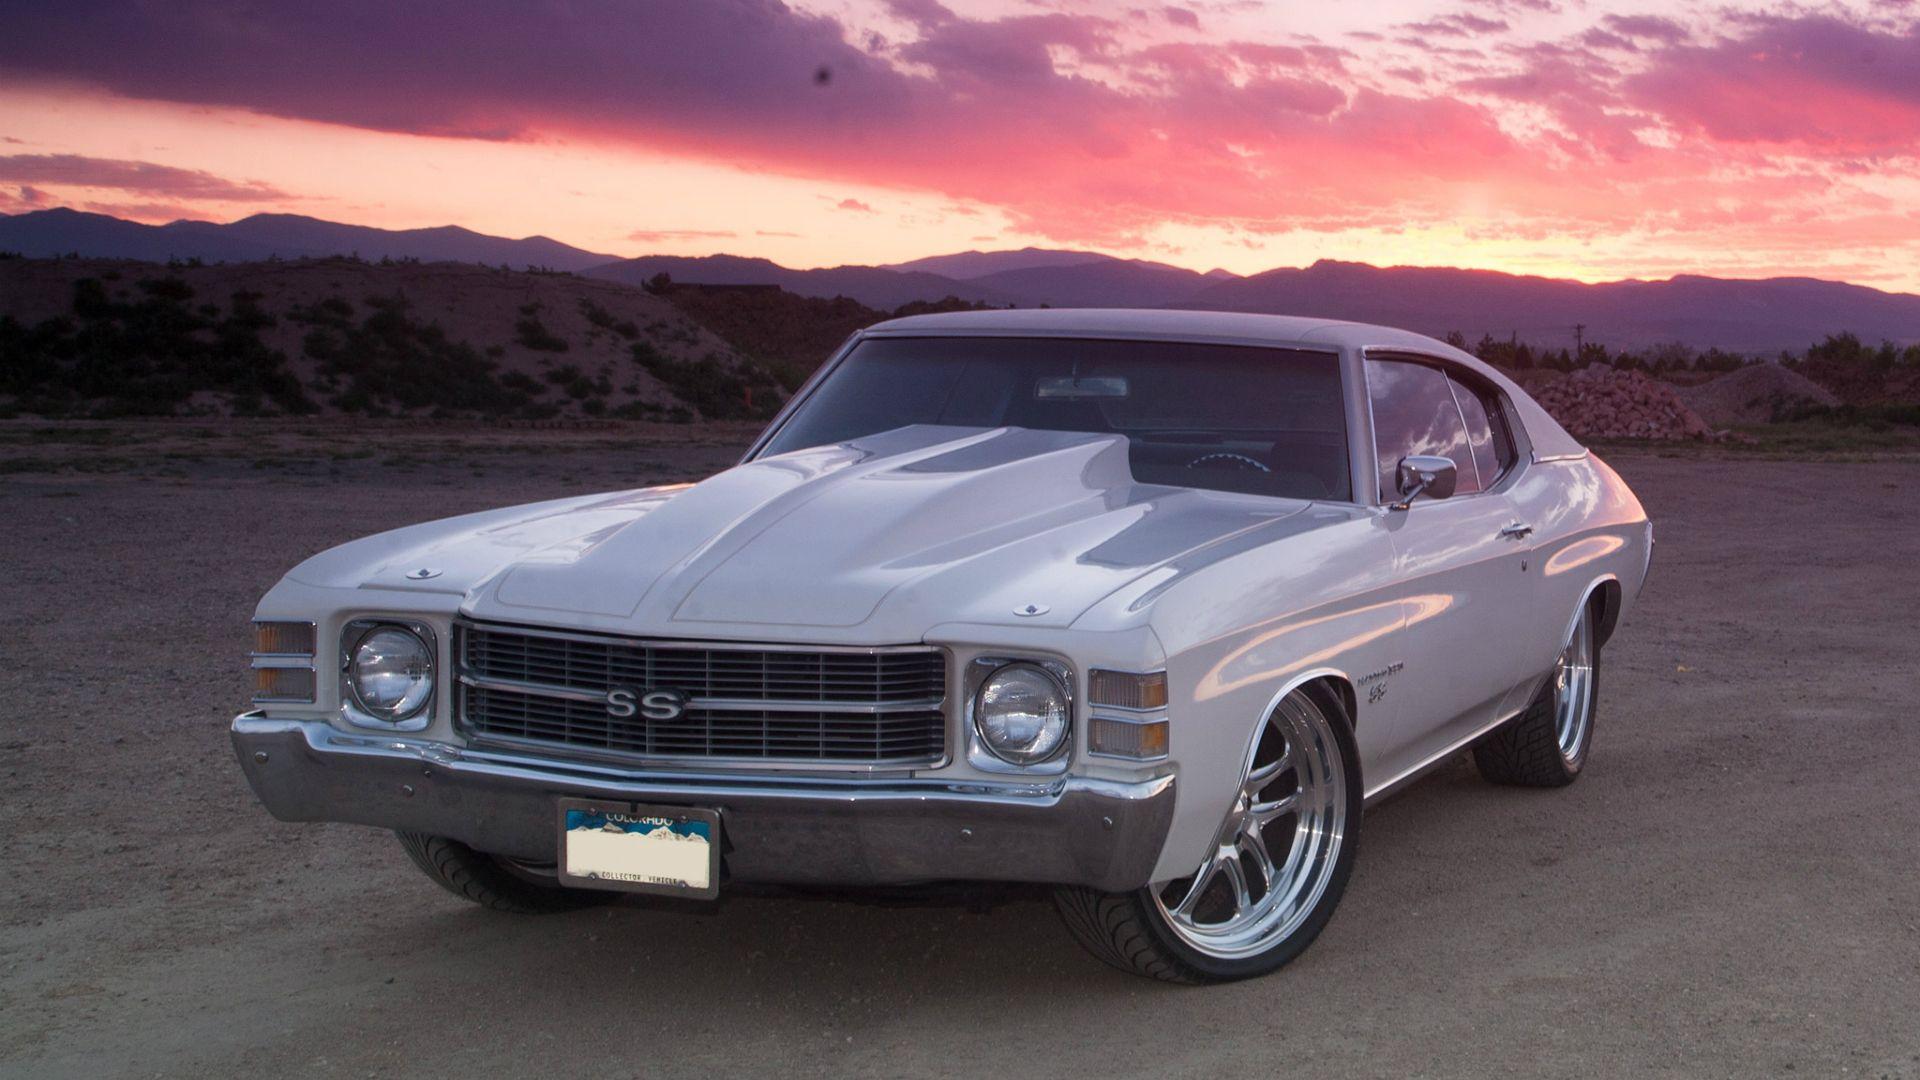 Car Chevrolet Chevelle SS 1970 wallpaper and image